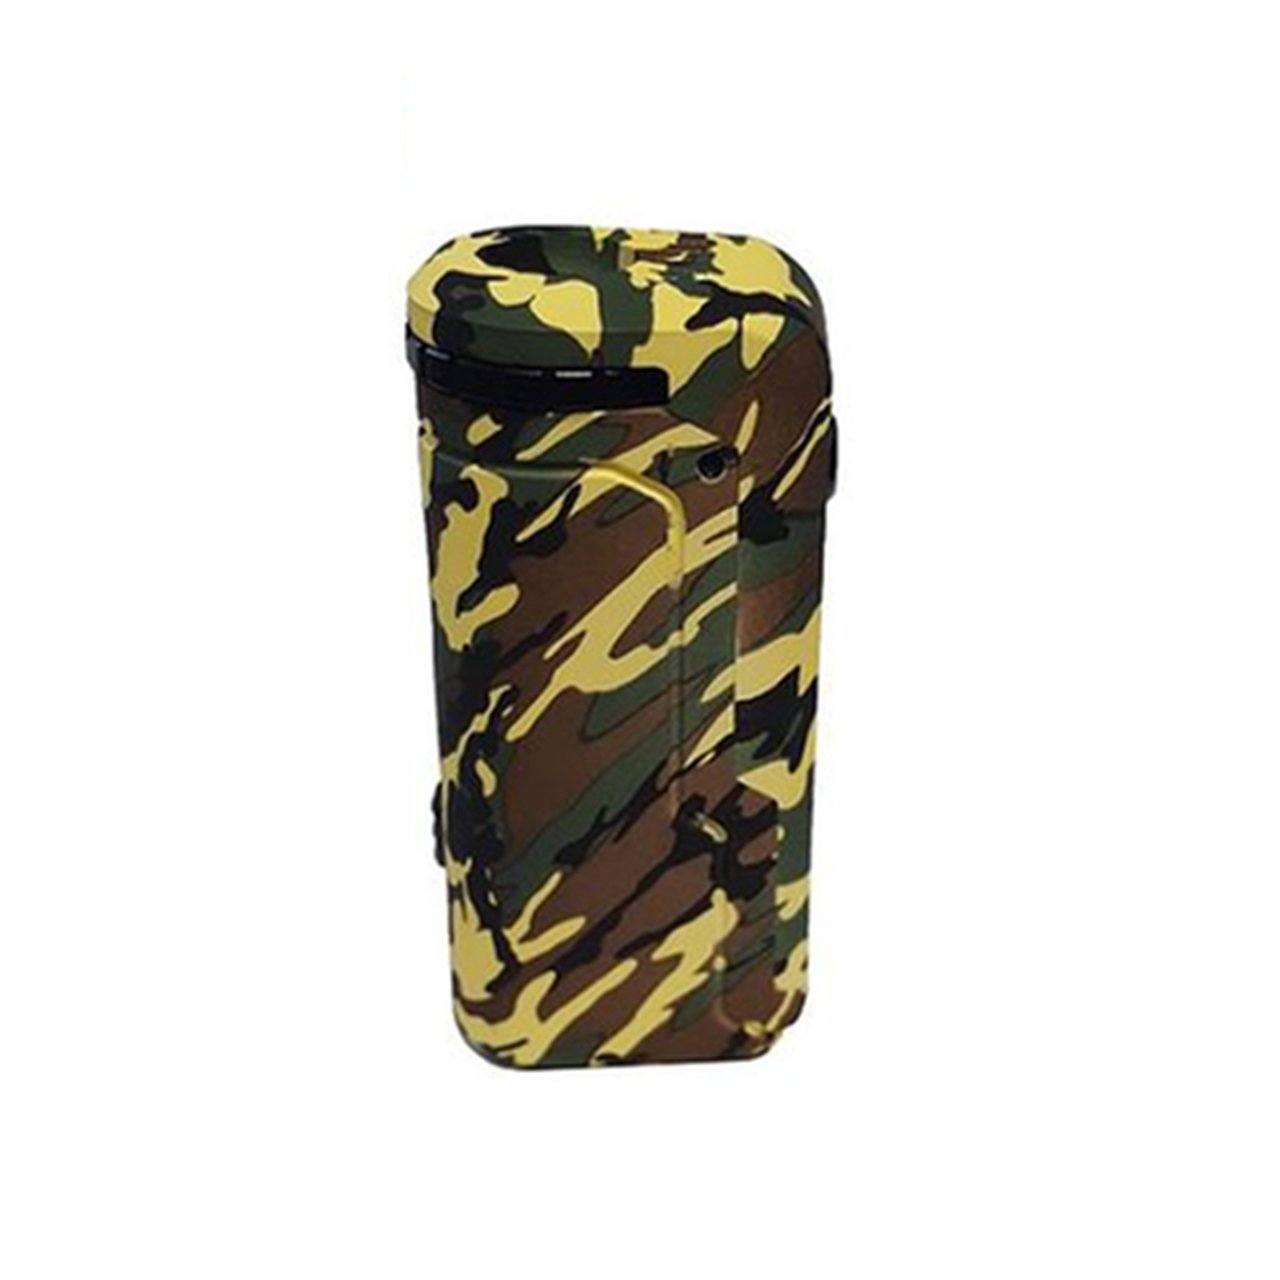 Yocan UNI Universal Portable Box Mod Flower Power Packages Camo 